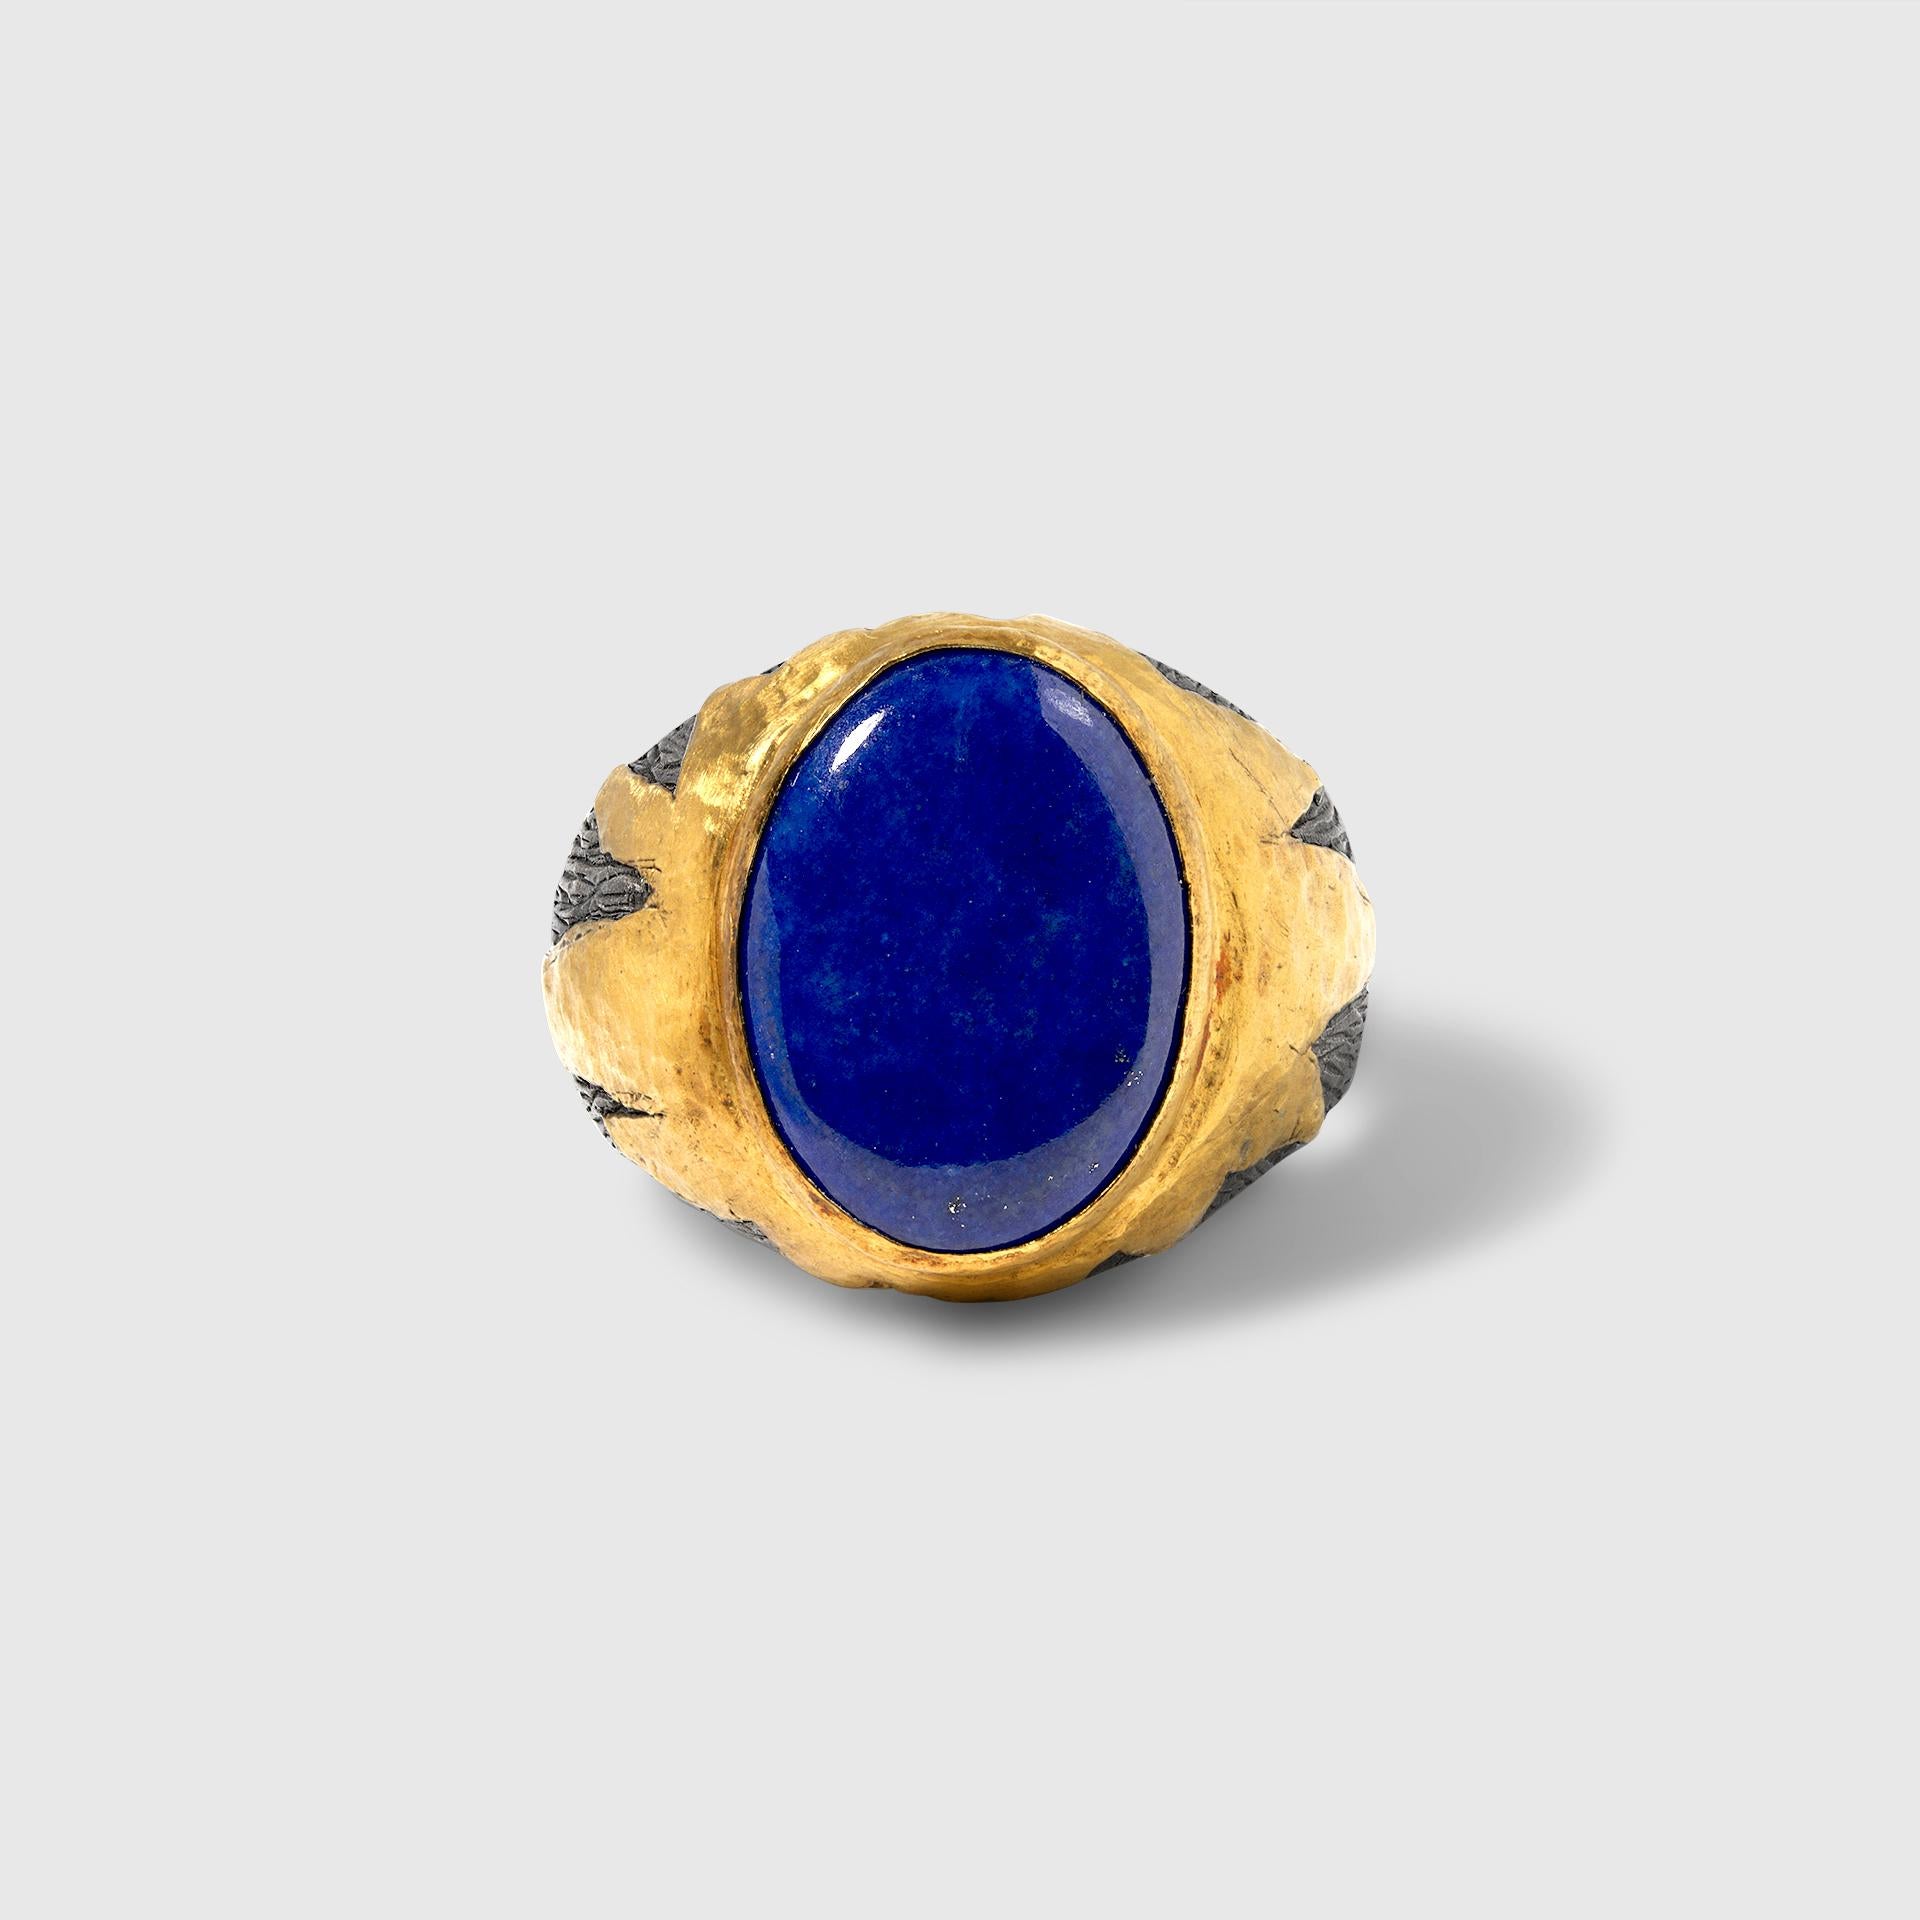 Large Oval Lapis Lazuli w/ 24K Gold & Silver Textured Cocktail Ring In New Condition For Sale In Bozeman, MT